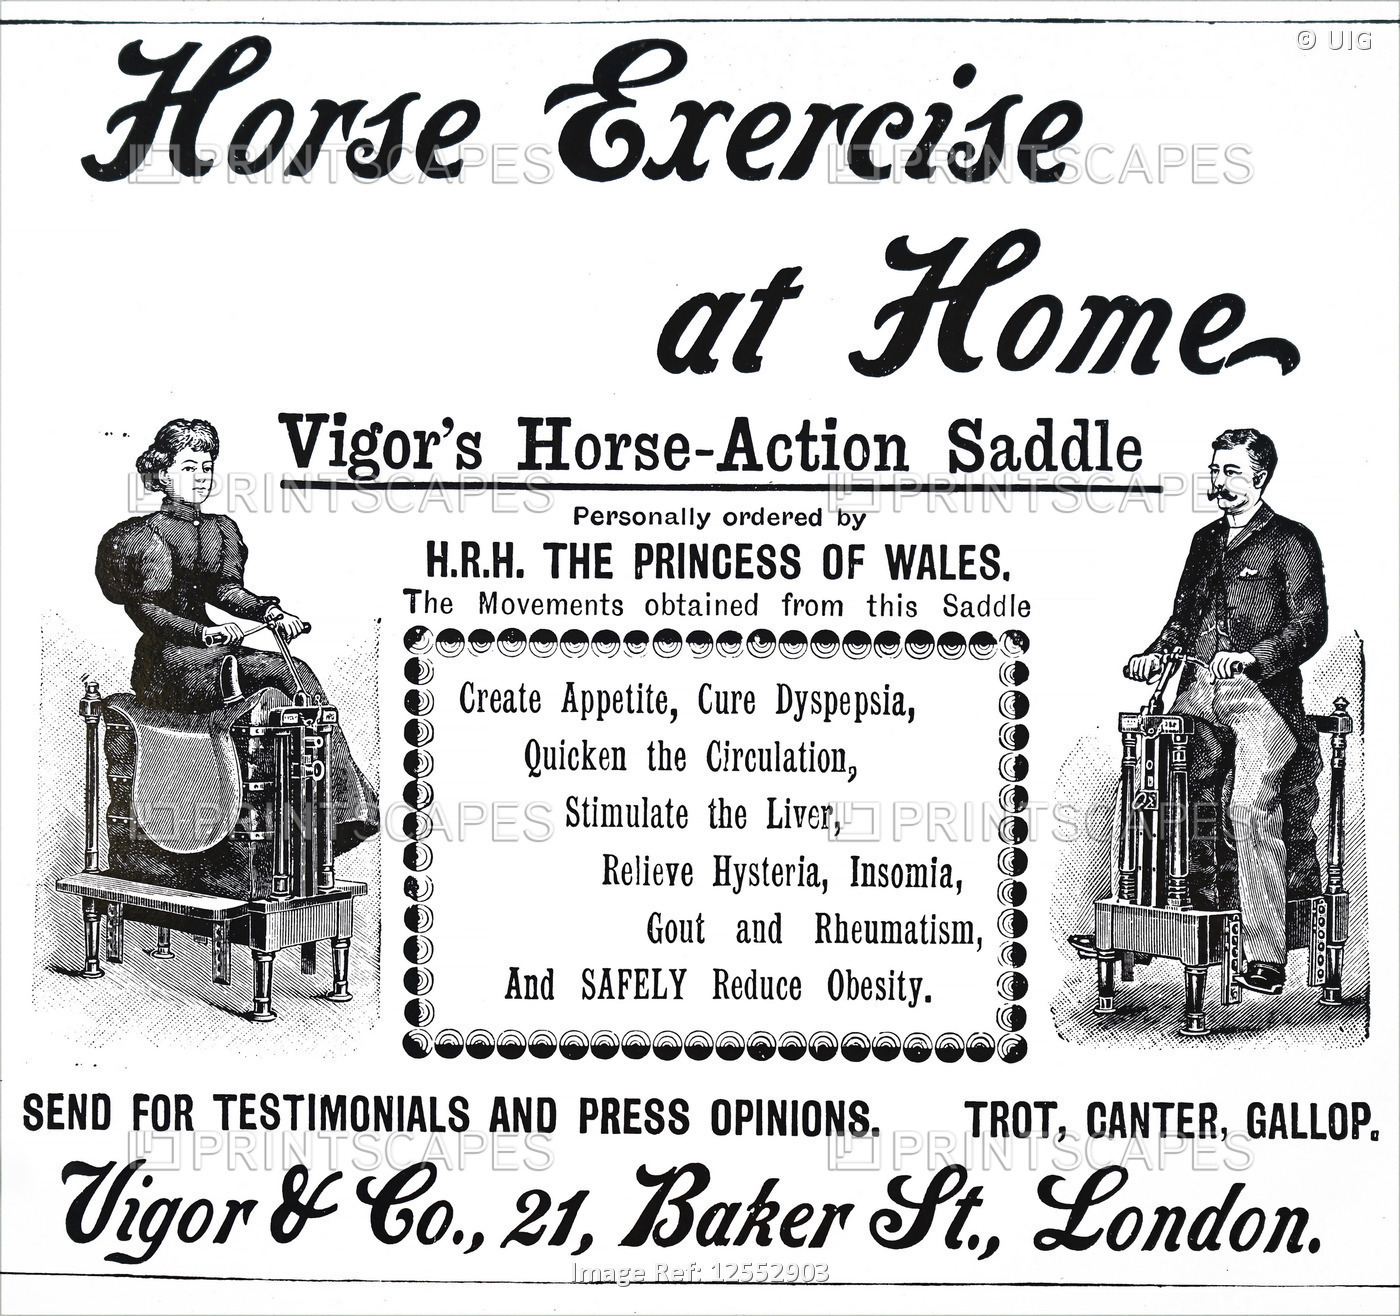 Advertisement for a Vigor's Horse-Action Saddle, 19th century